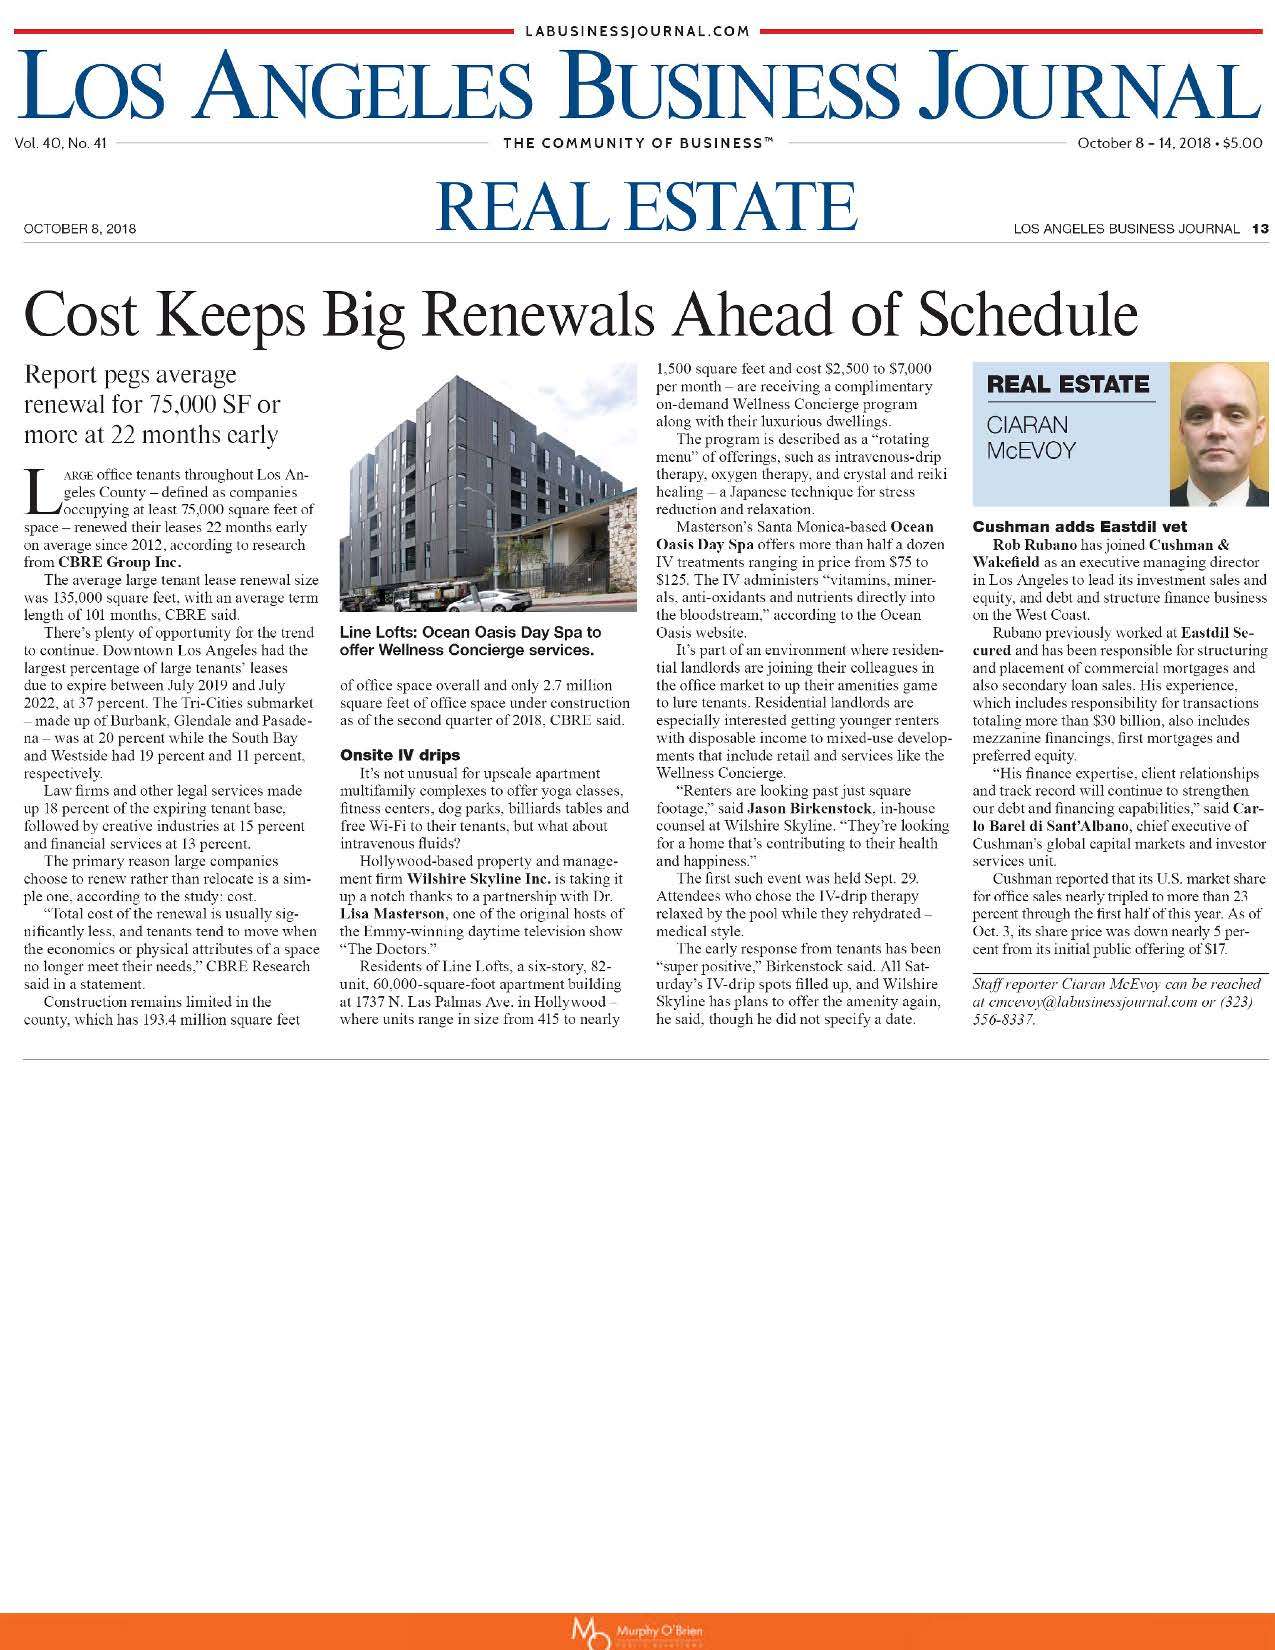 Los Angeles Business Journal October 8 2018 The Line Lofts